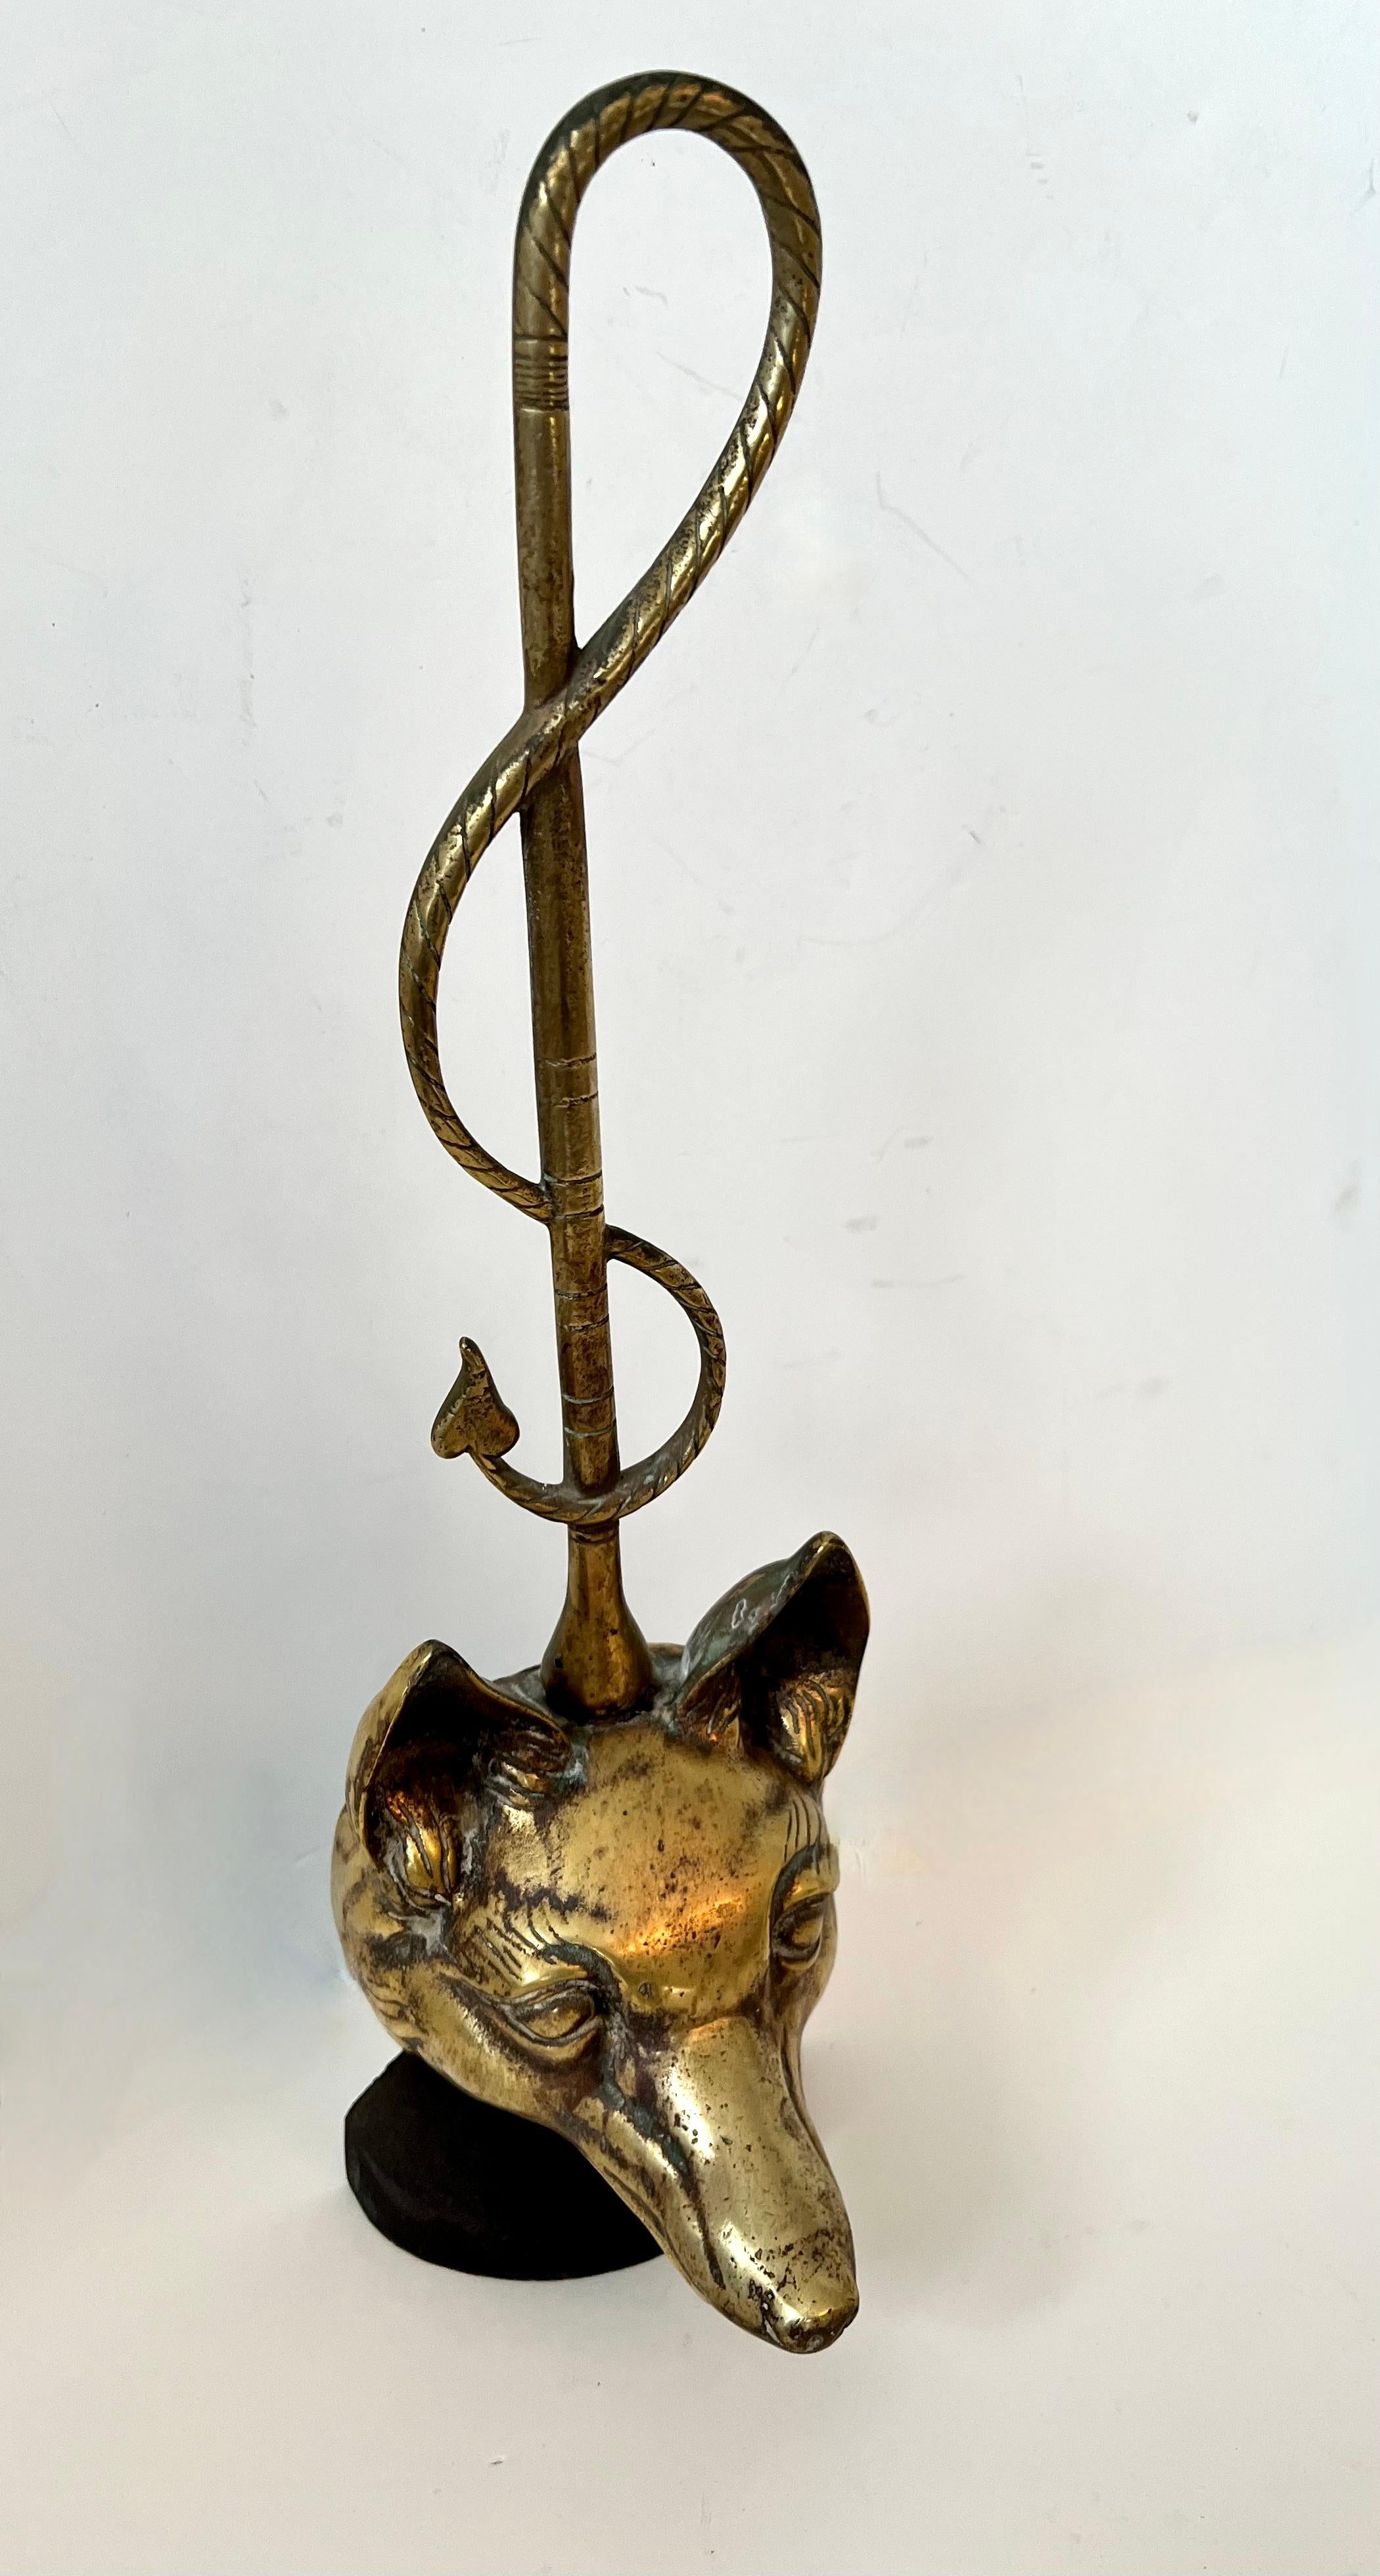 English Art Deco Brass Fox Door Stop With Riding Crop For Sale 2